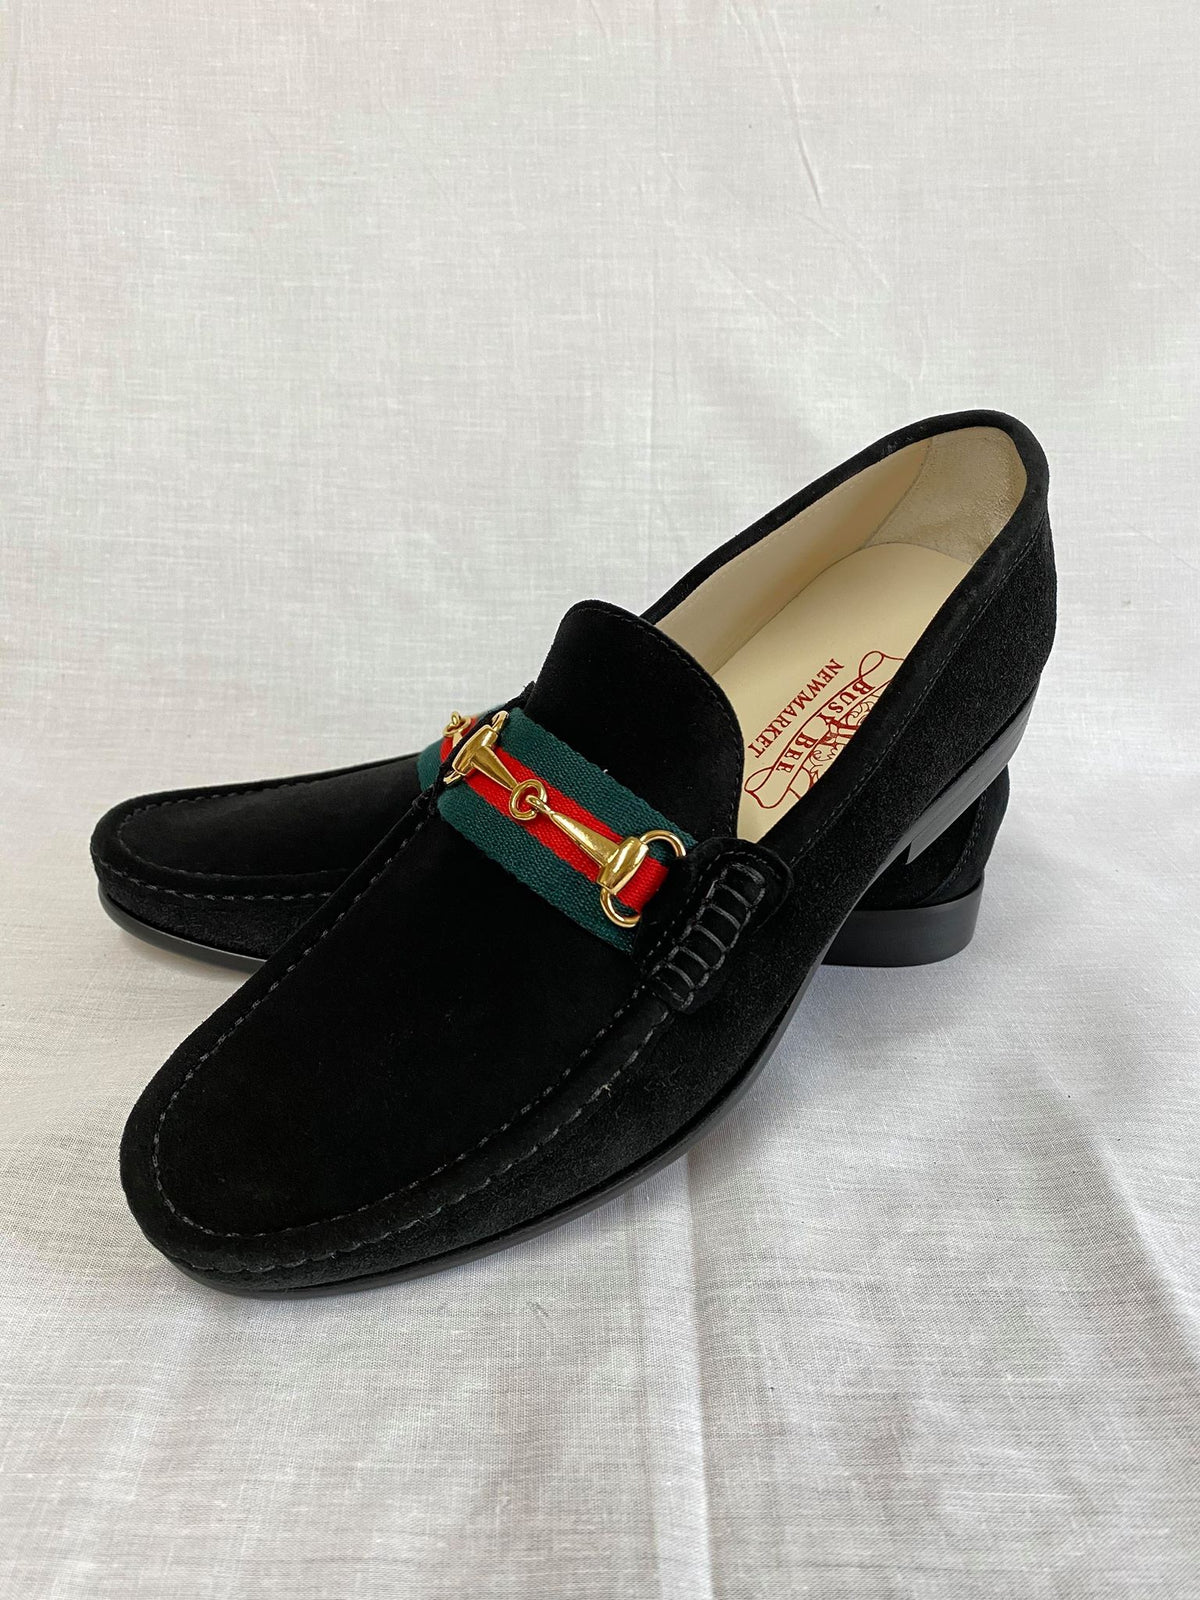 Black Suede with Band